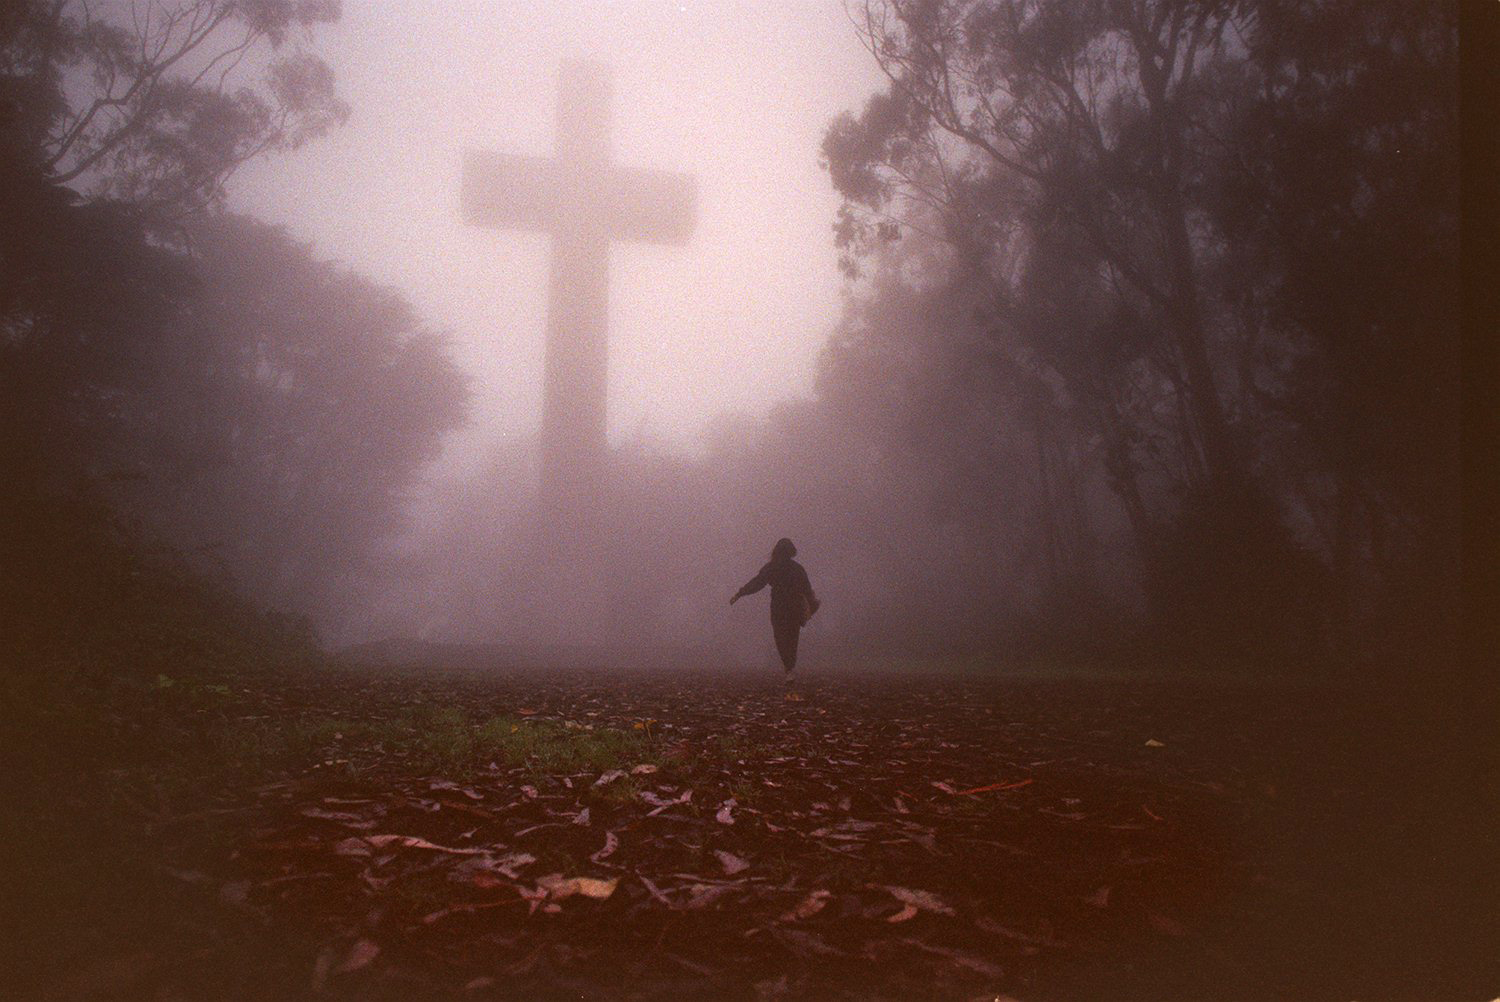 A silhouetted person walks towards a large cross in a foggy, forested area with a ground covered in leaves.